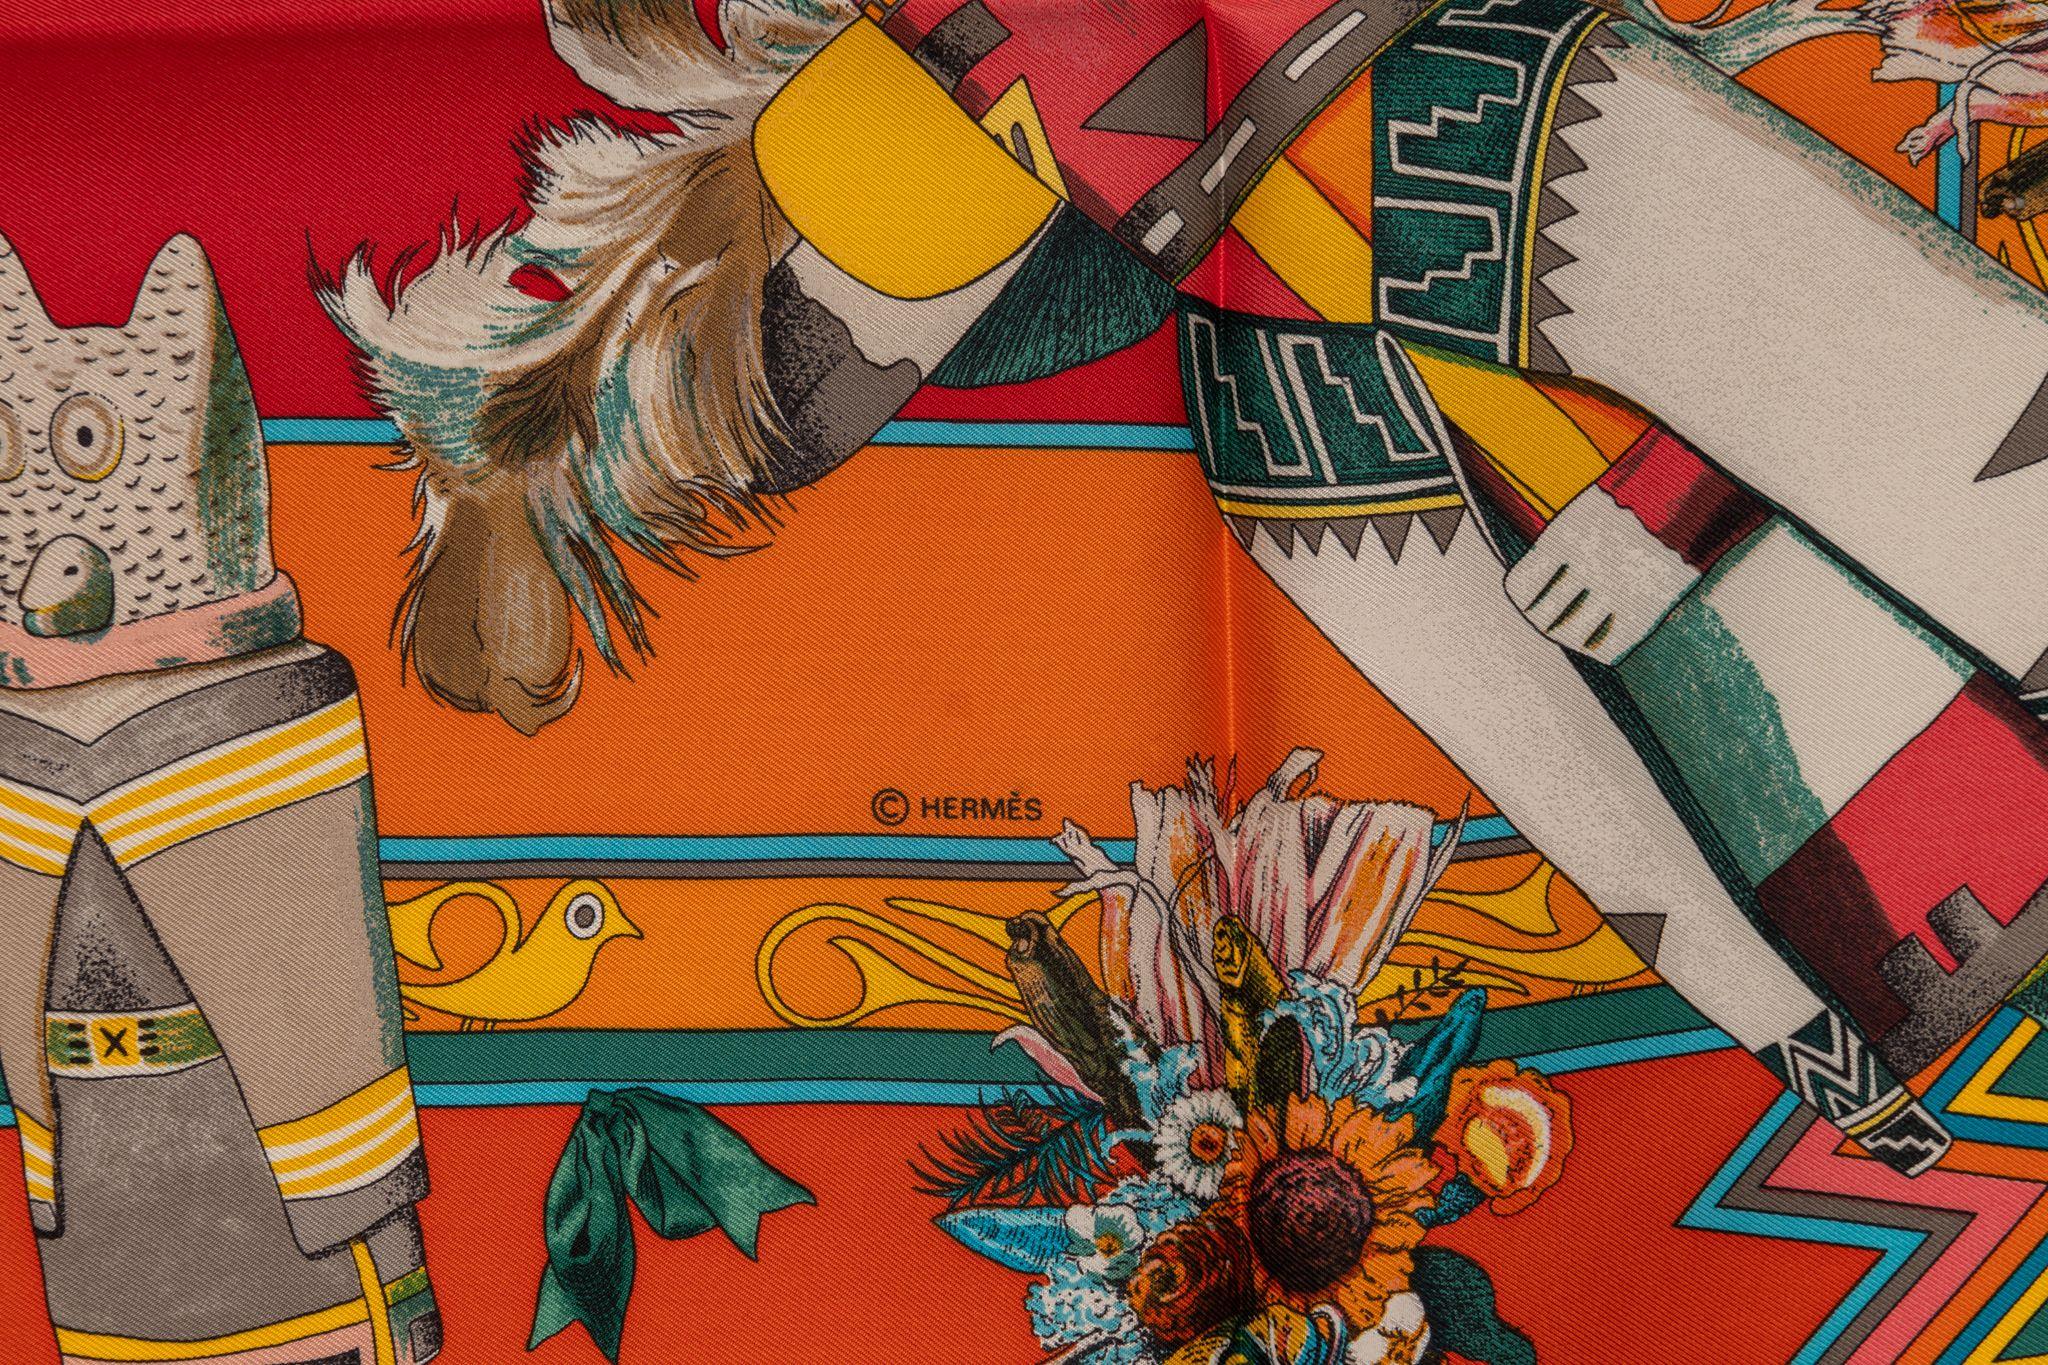 Hermès Rare Kachinas Tribal Silk Scarf In Excellent Condition For Sale In West Hollywood, CA